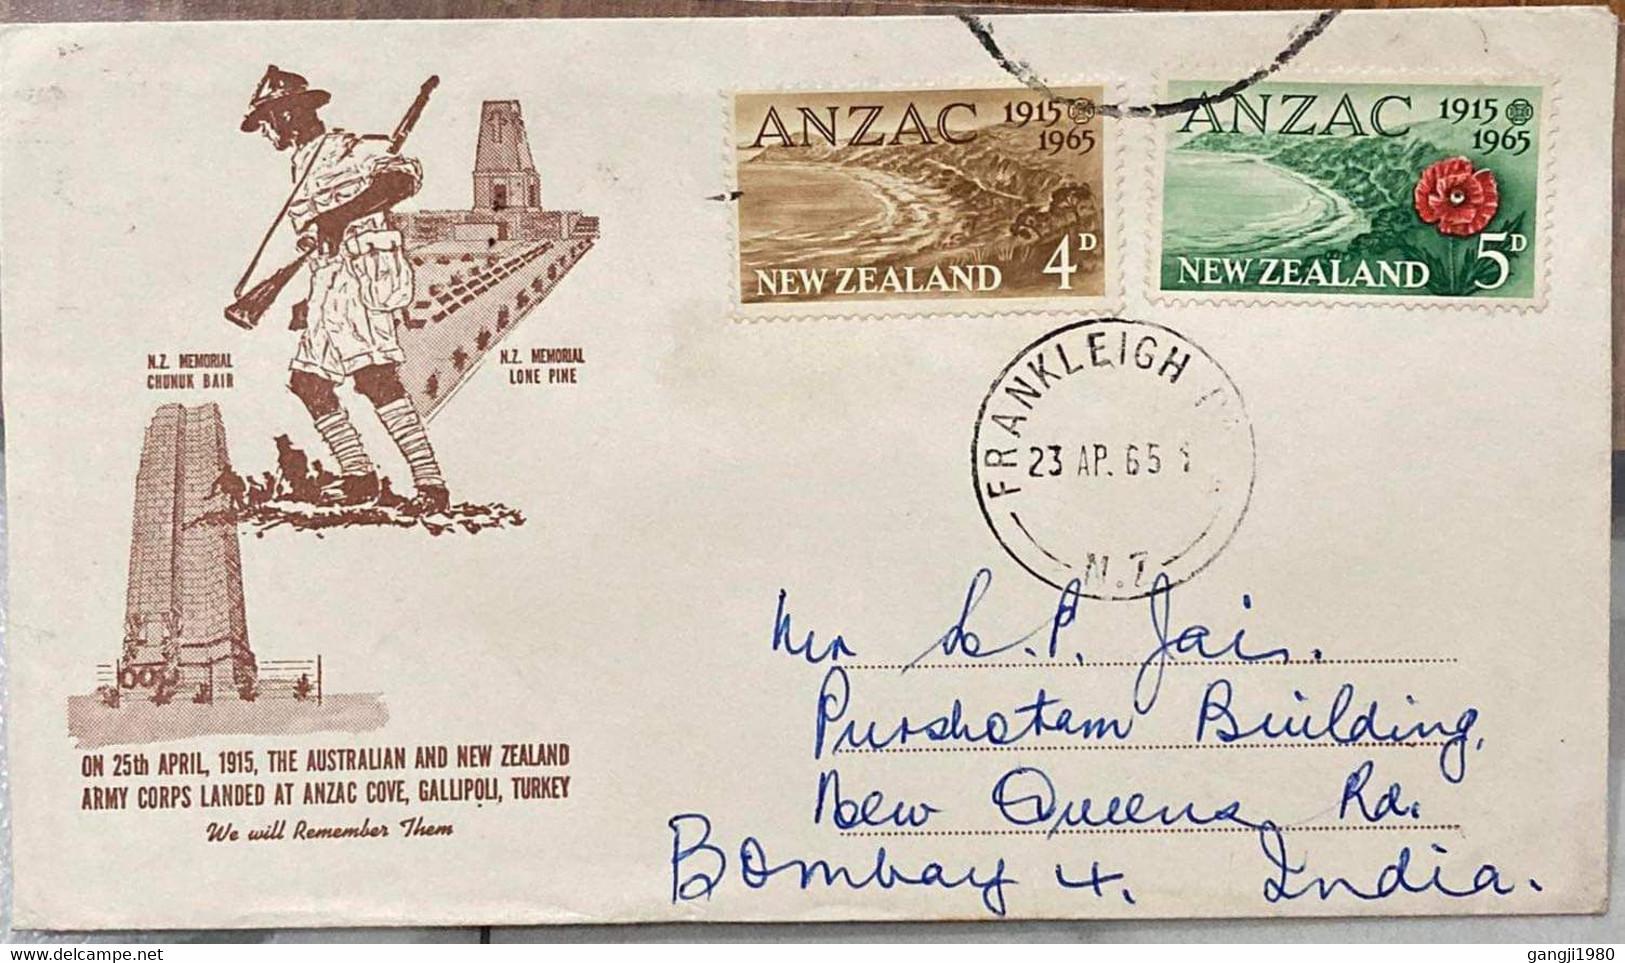 New Zealand,Australia,1965.private Fdc, ANZAC,Frankleigh,POST MARK,TO ,INDIA,TO ADDRESS,L.P.JAI ,Cricketer,cricket, - Lettres & Documents